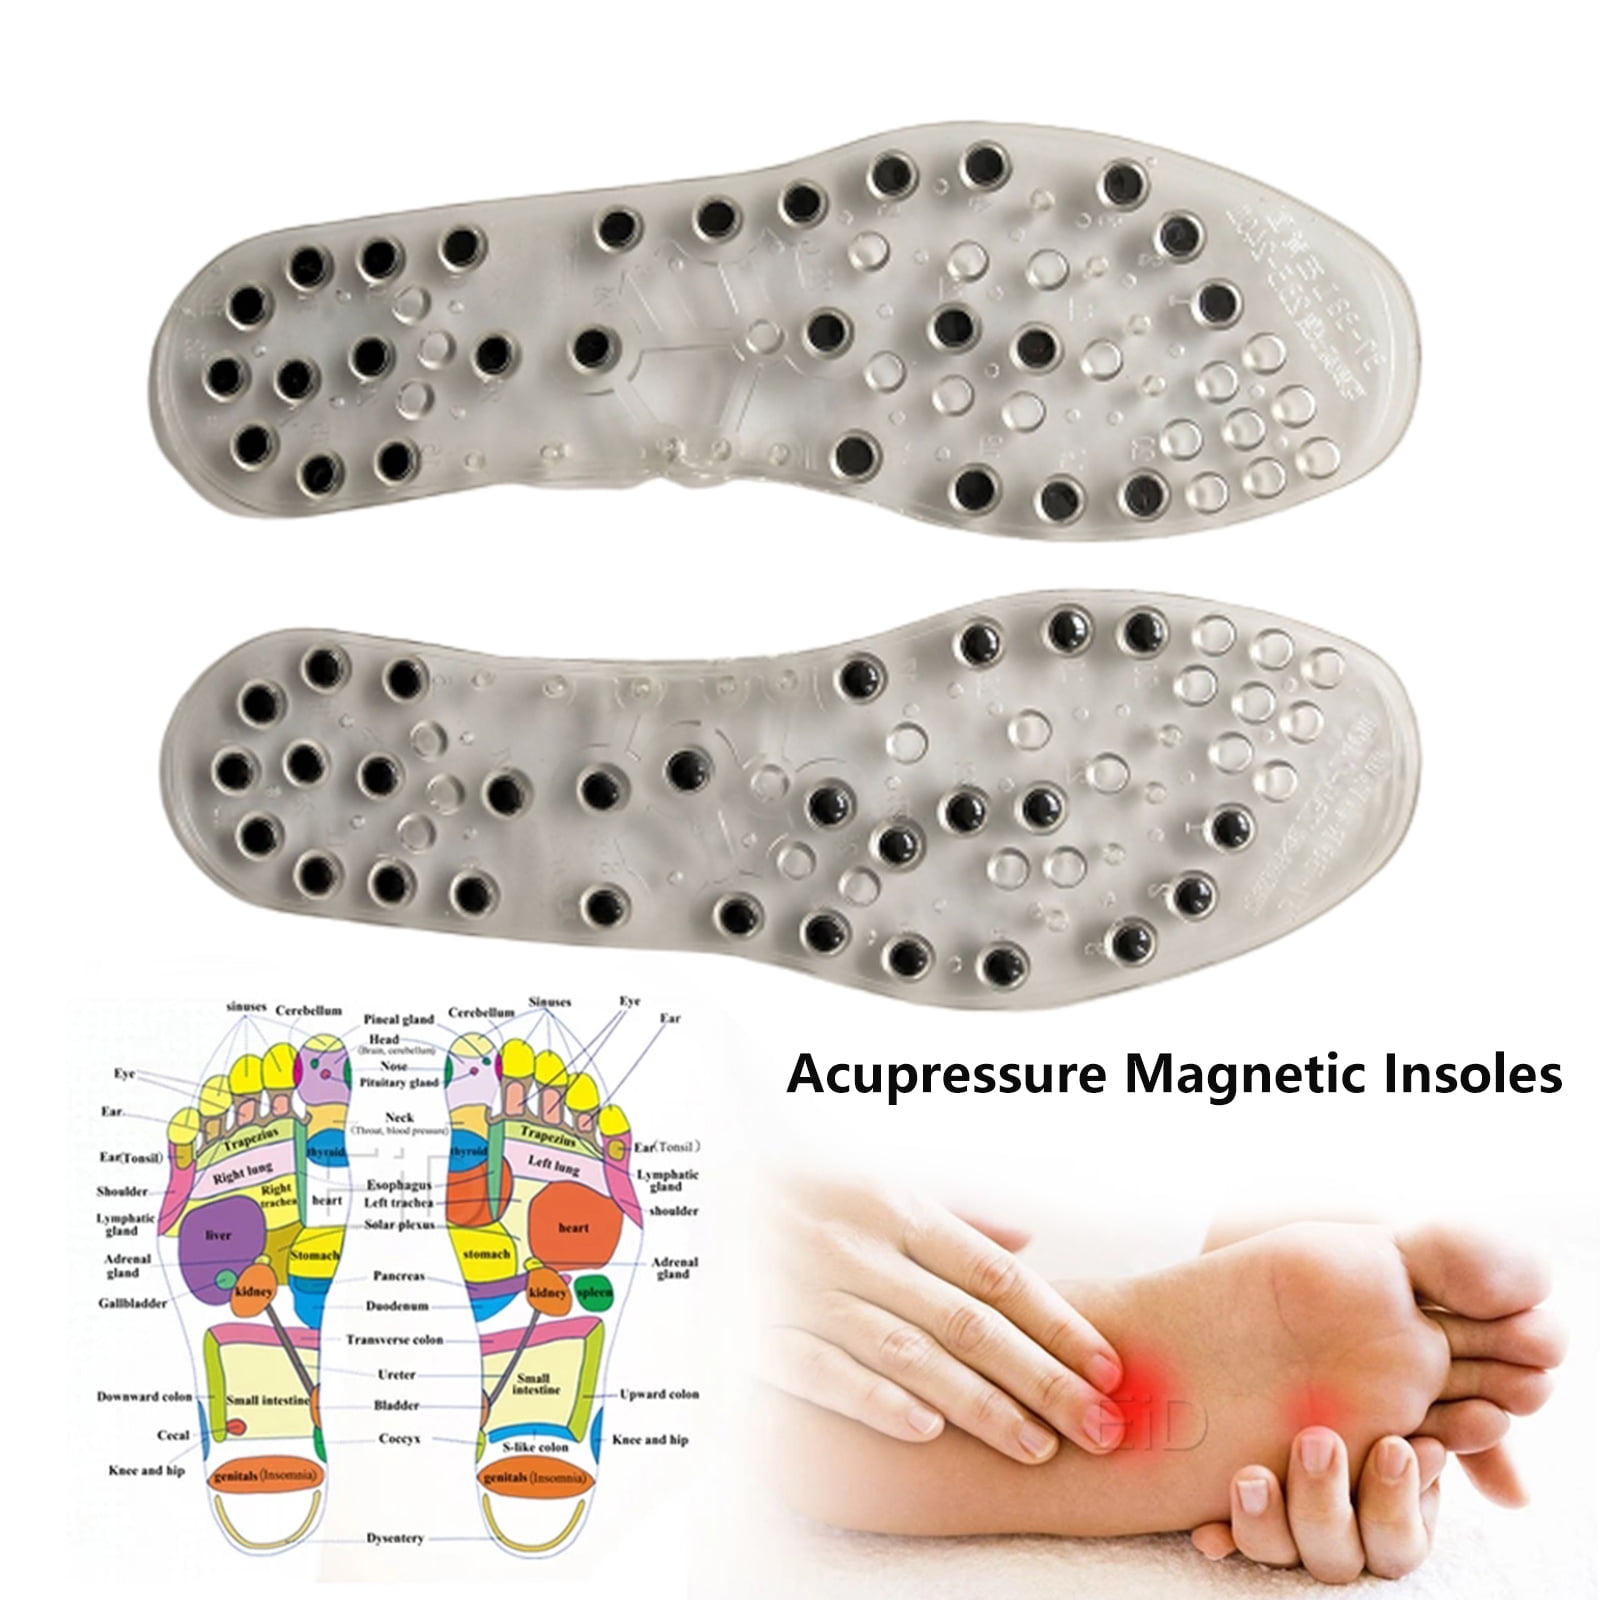 Acupressure Acupuncture Insoles mprove Blood Circulation Foot Massage Shoes 